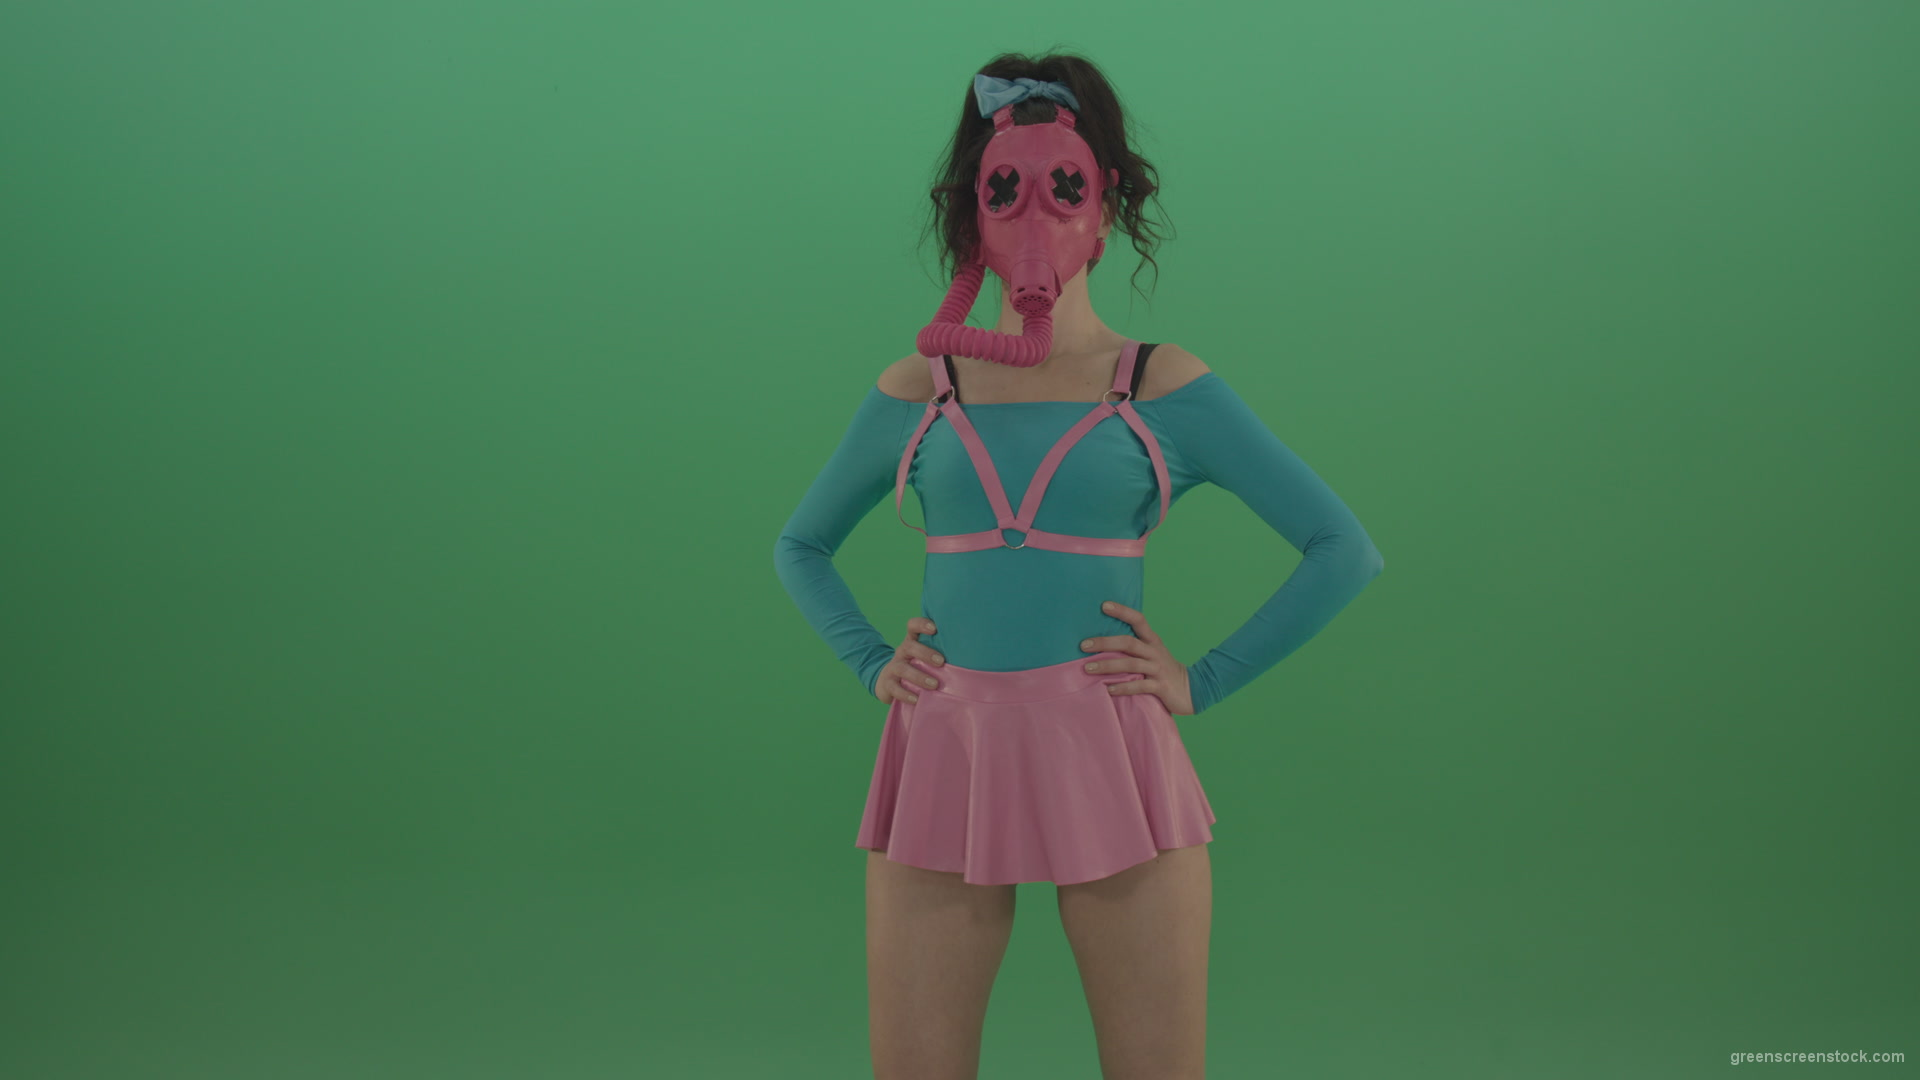 Beautiful-erotic-dance-from-a-woman-in-a-mask-in-a-pink-suit-on-green-background_001 Green Screen Stock